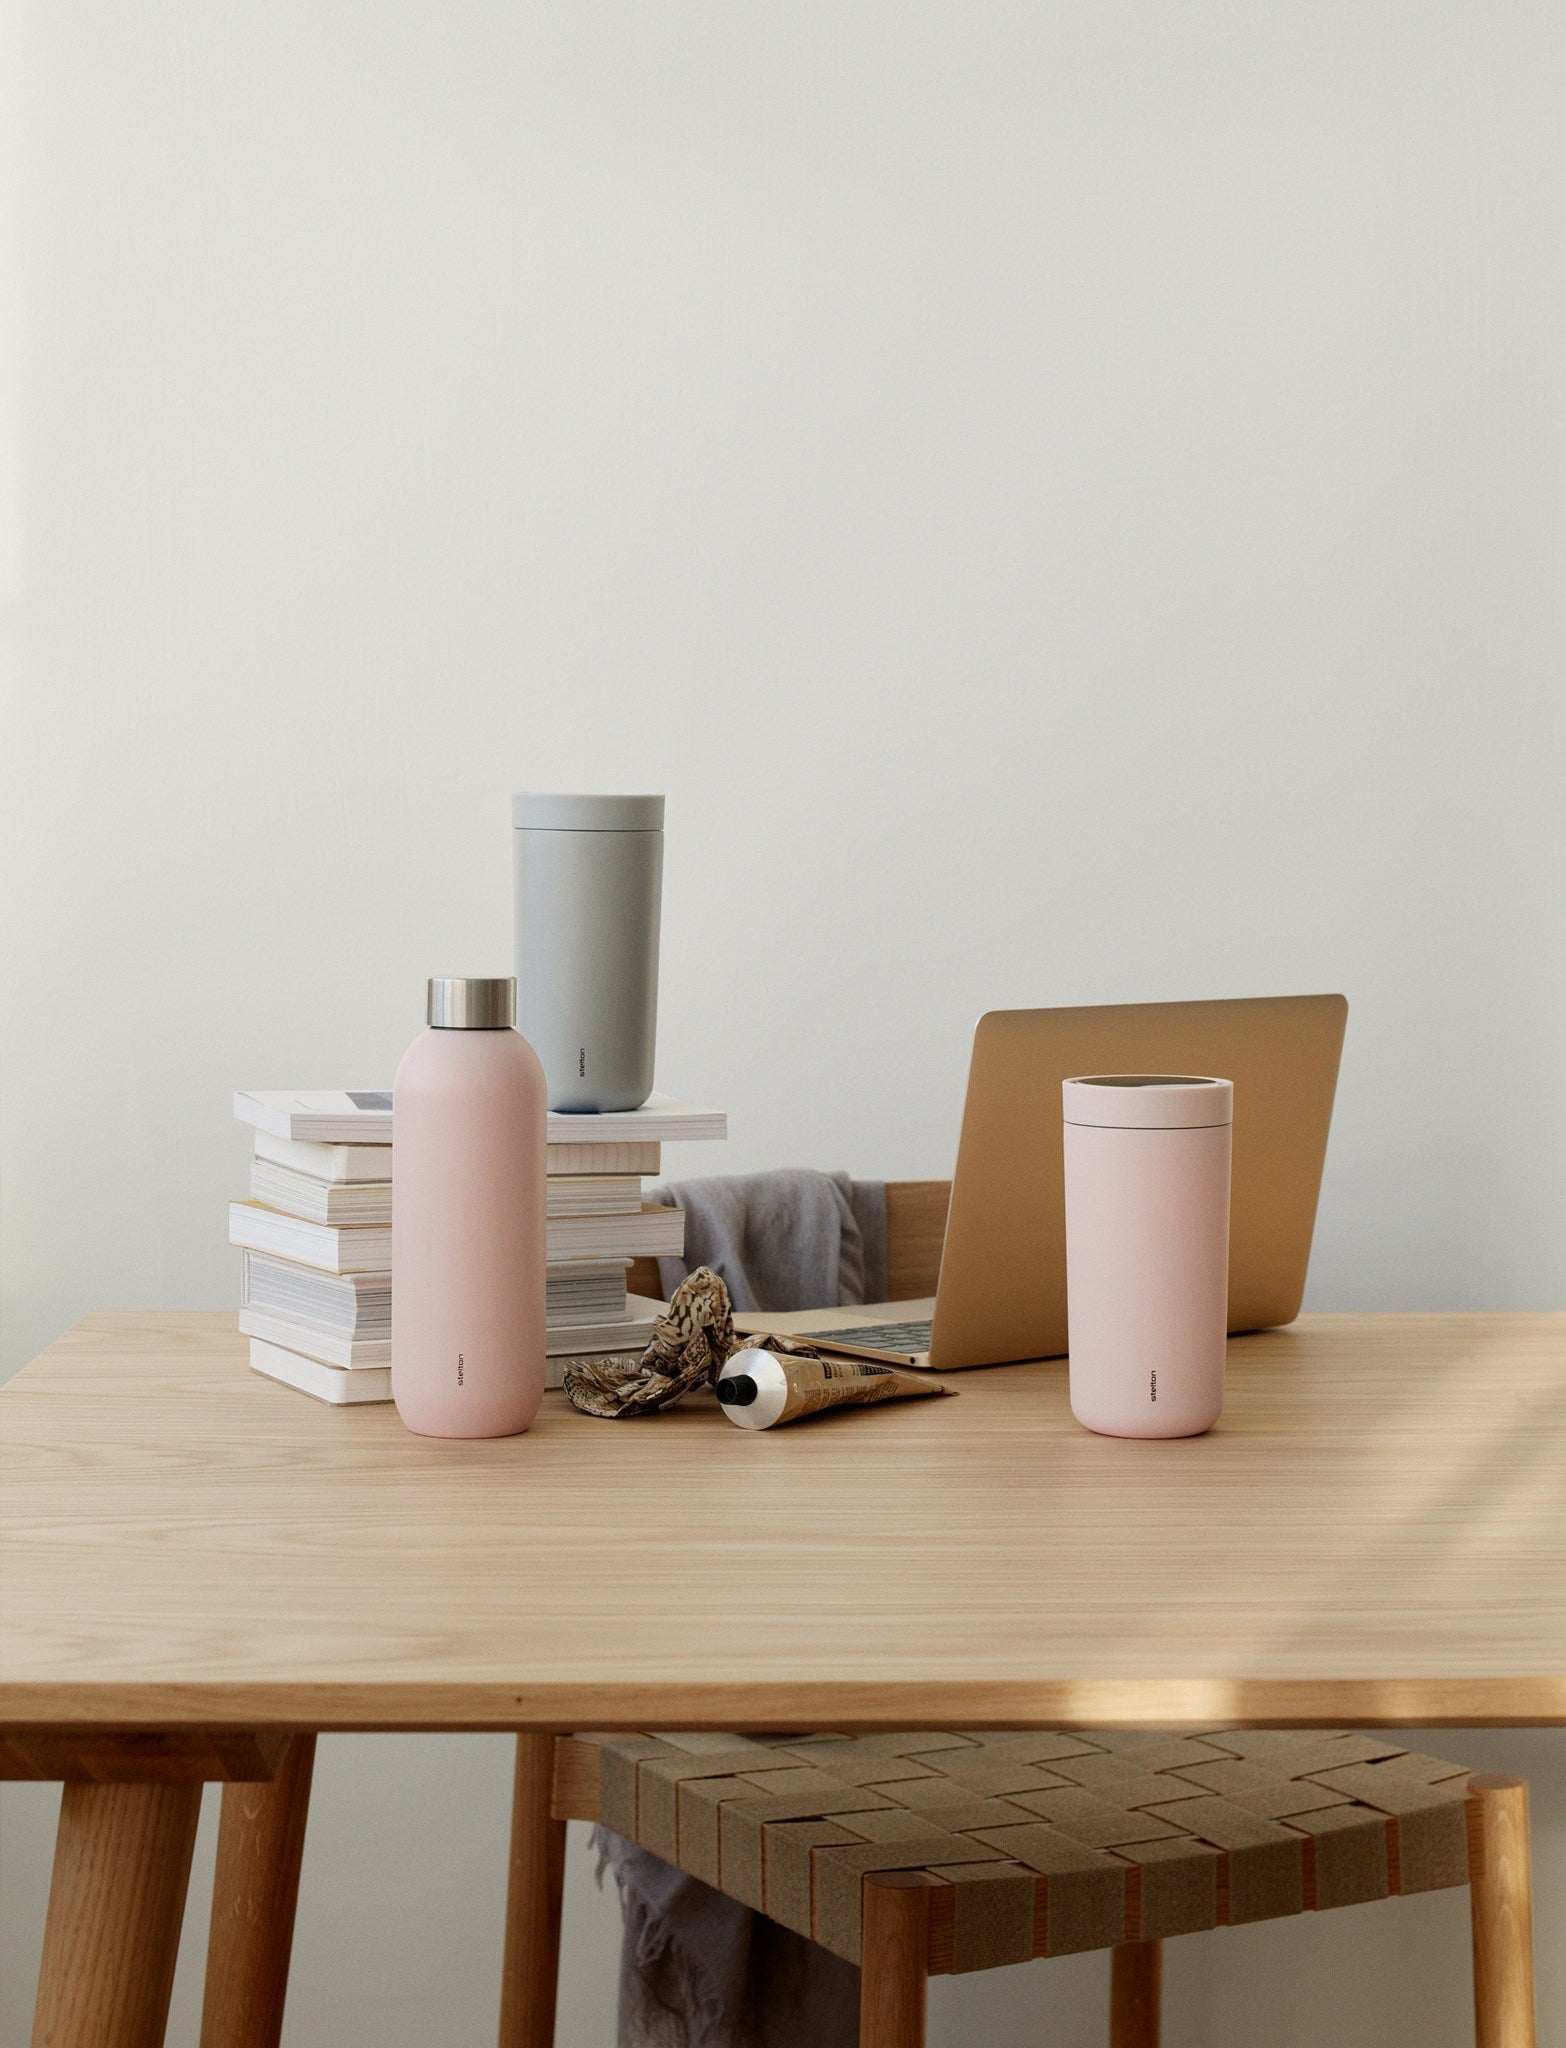 Stelton Keep Cool Termo Botto 0,6 L, Rose douce